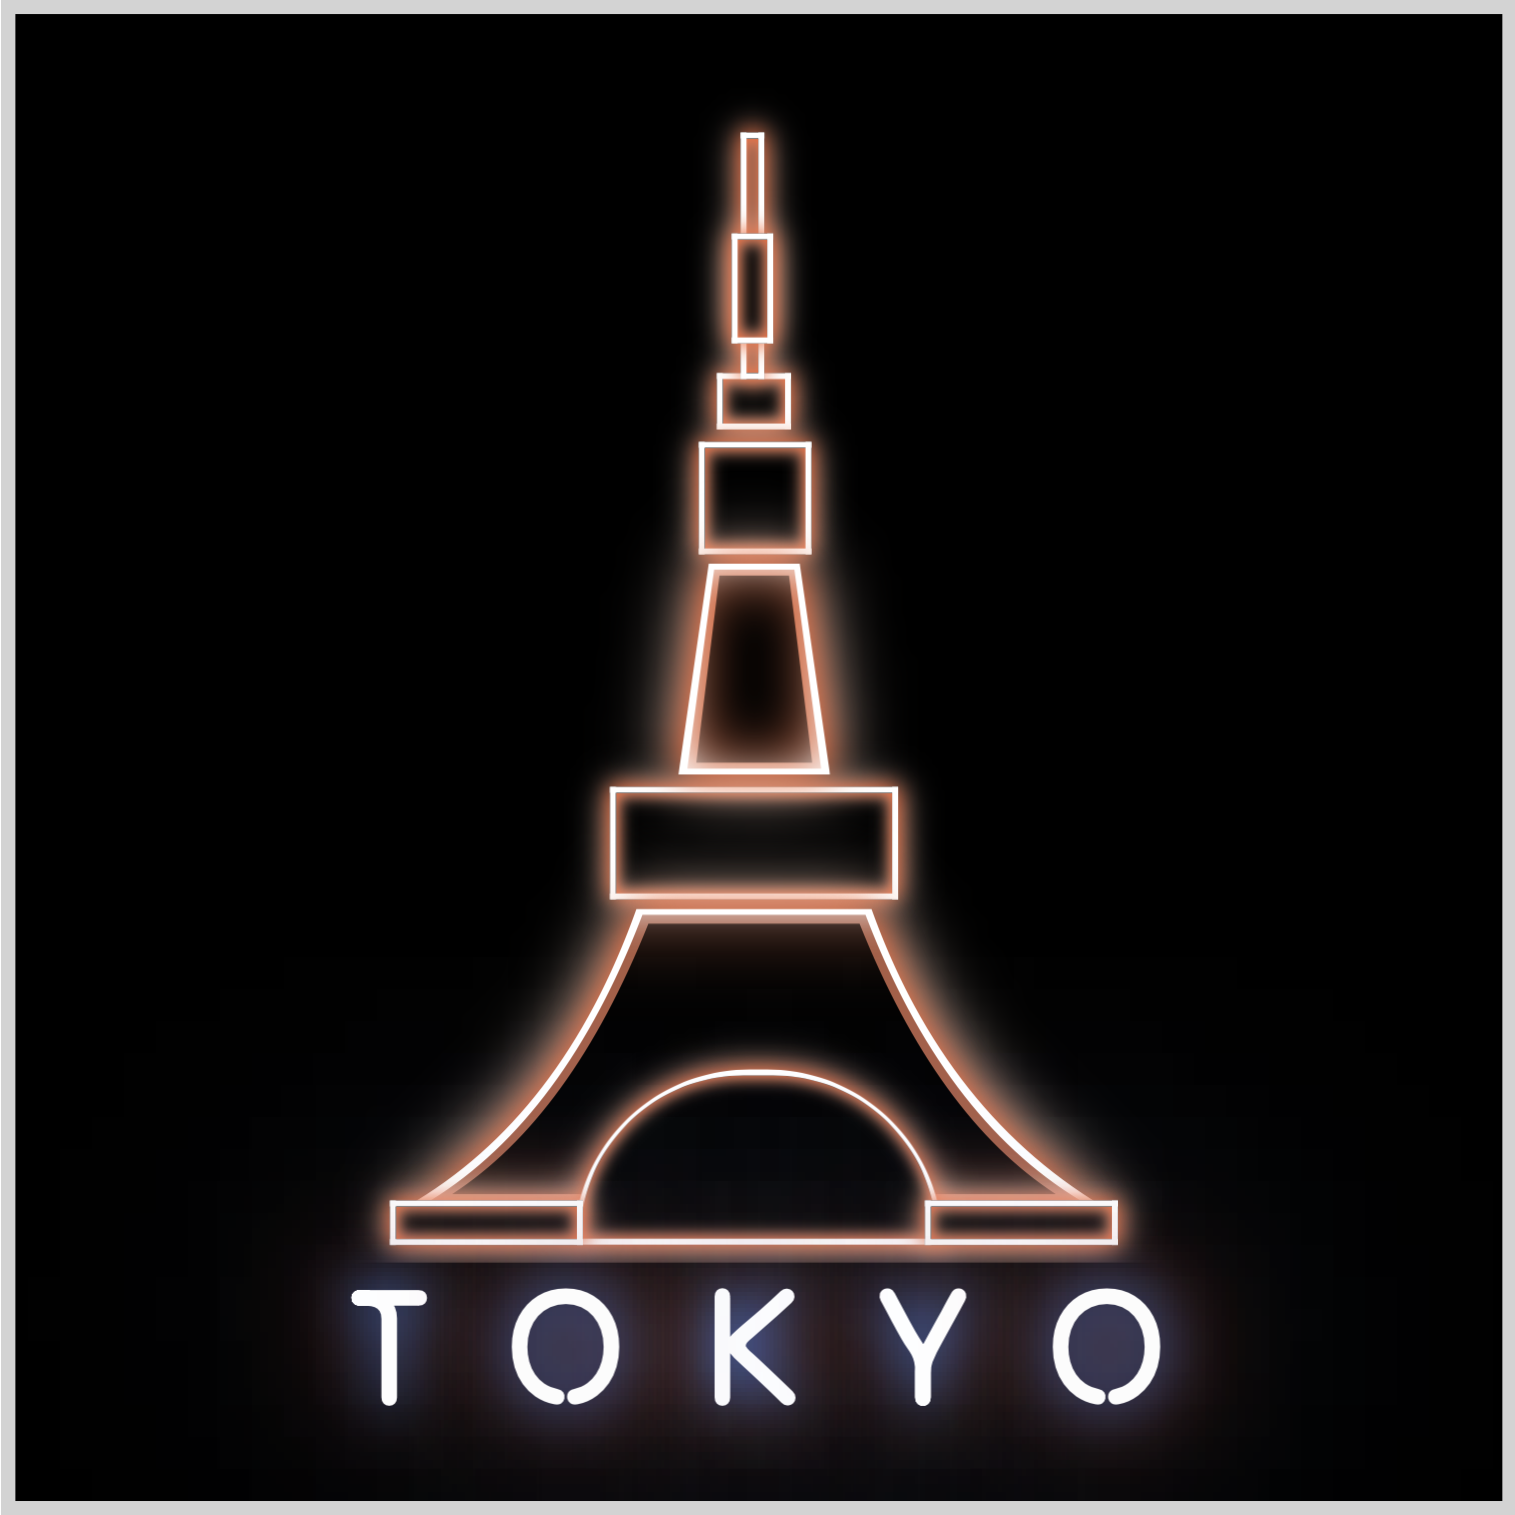 Tokyo Tower and Tokyo Text